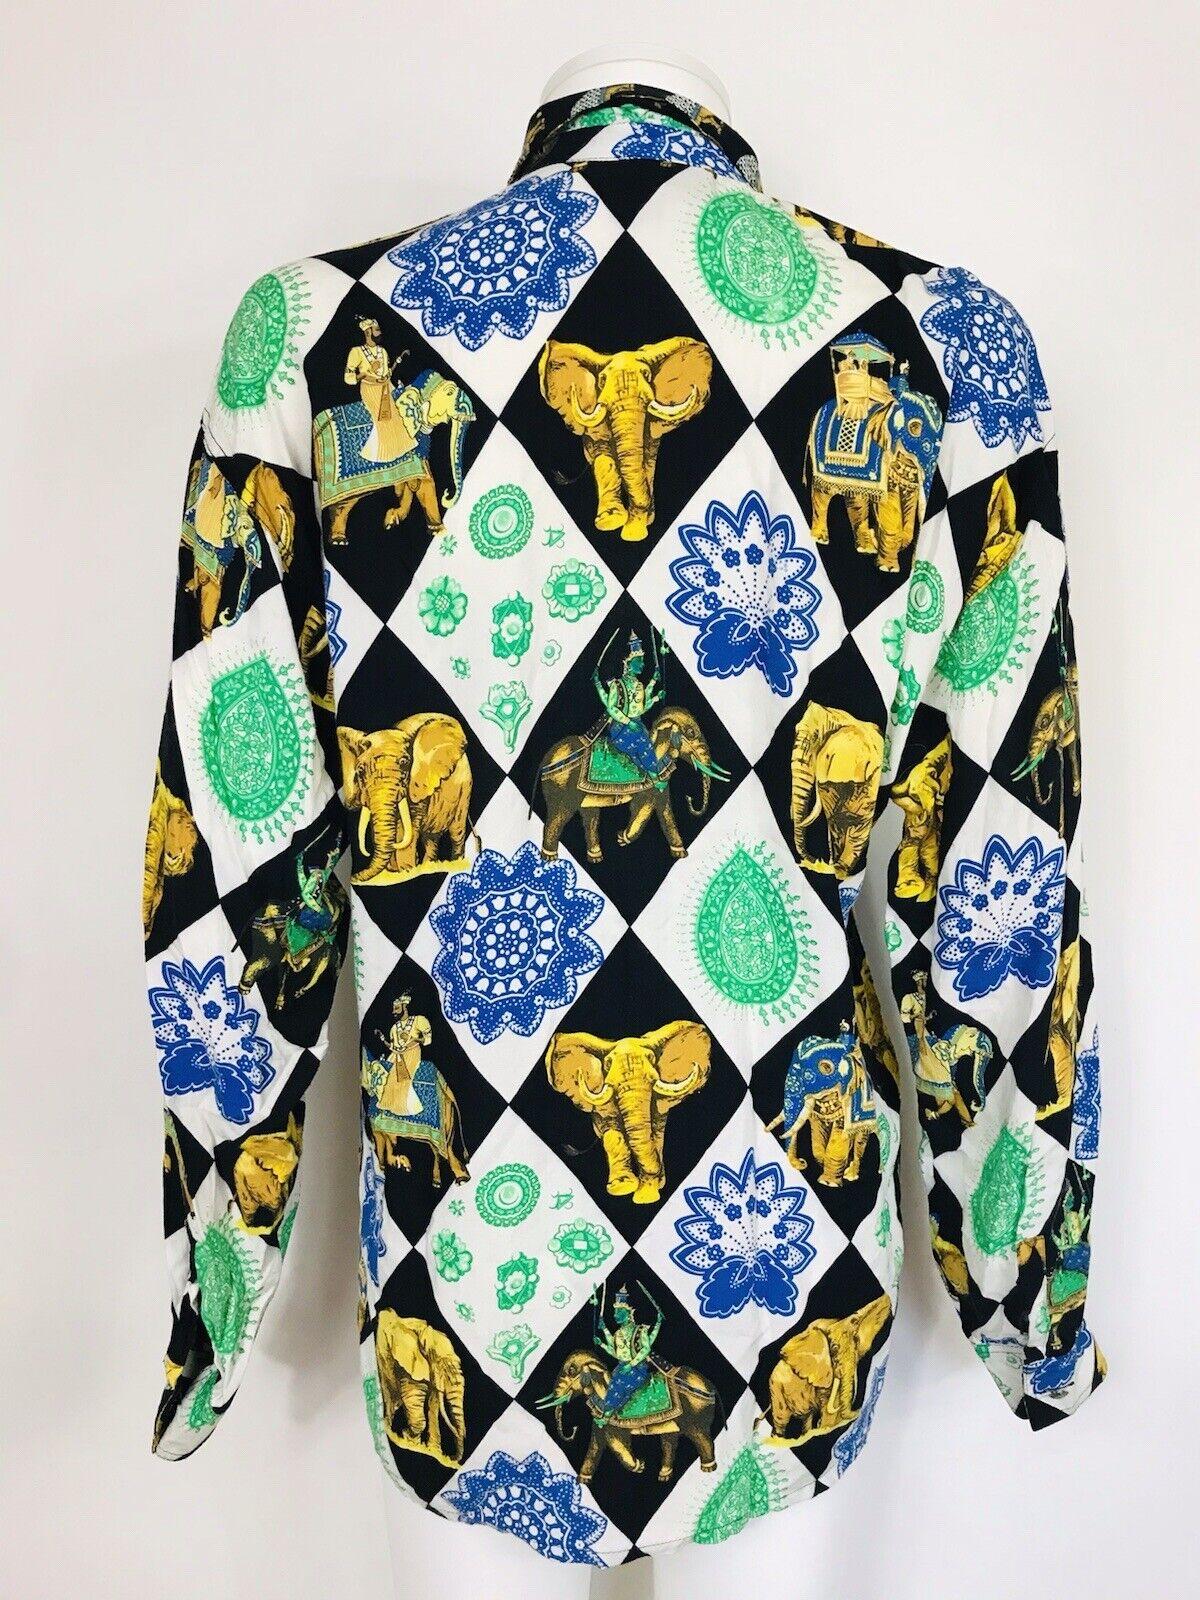 Versace Jeans Couture Gianni Black & White Checkered Vintage 90's Bright Elephant India Print Pattern Corduroy Button Up Shirt Jacket


Vintage and rare Versace Jeans Couture corduroy black and white checker background with a bright colorful India